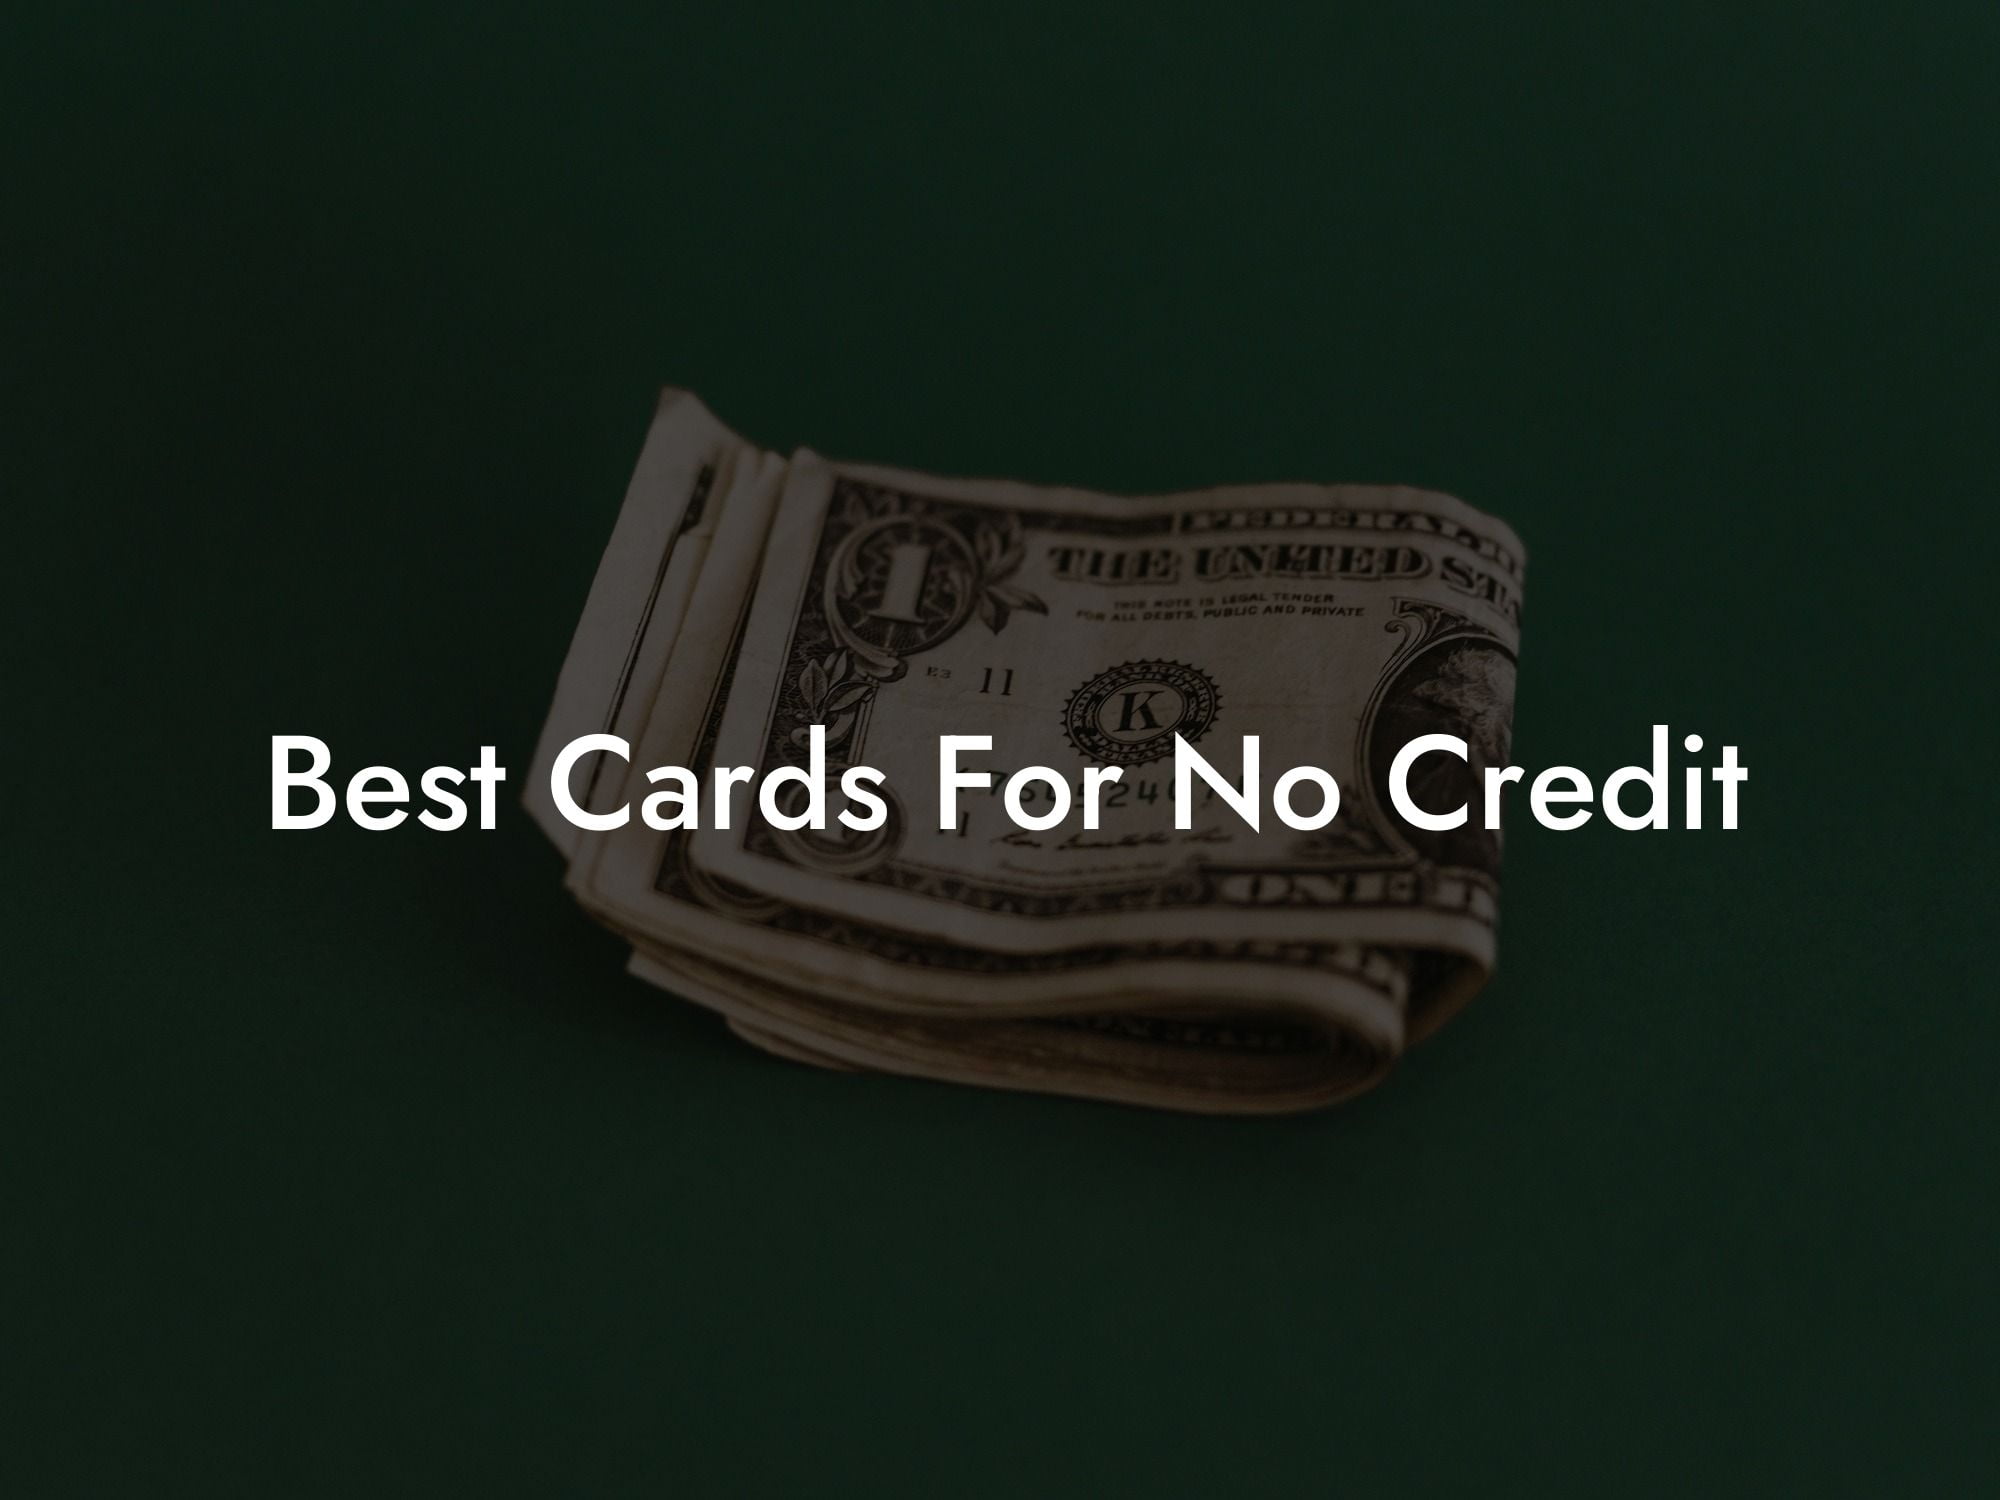 Best Cards For No Credit